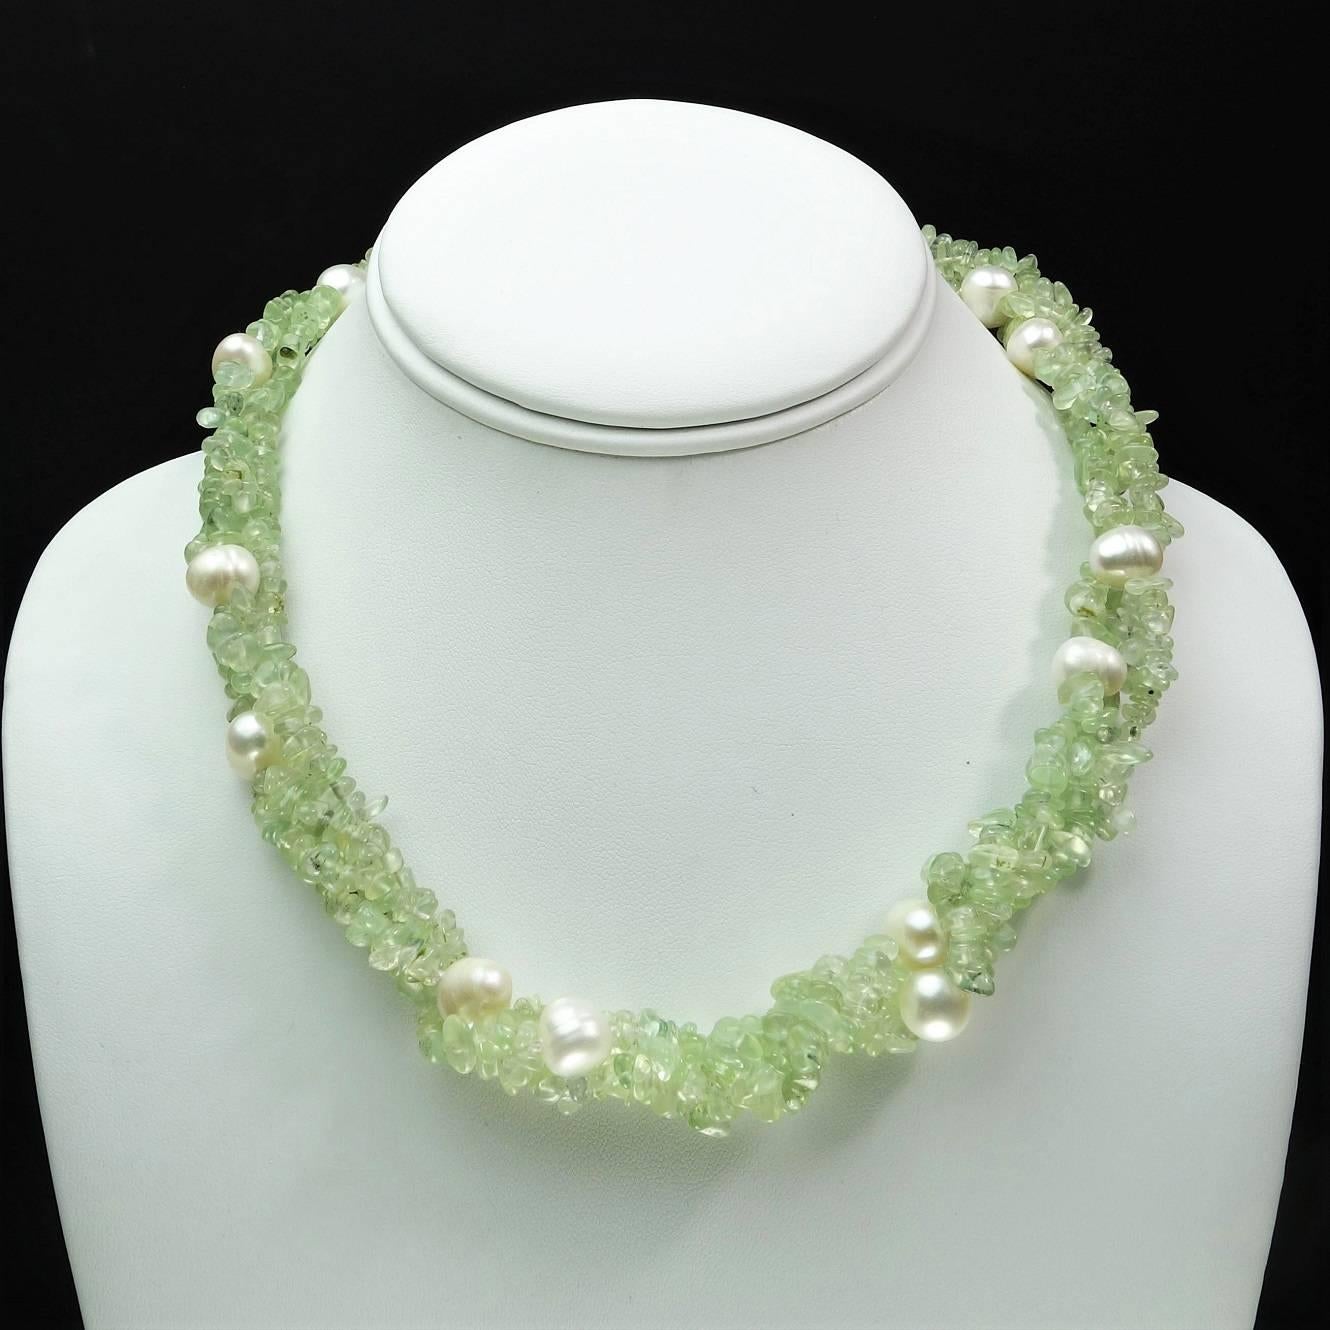 Artisan AJD Brazilian Prehnite Polished Chips and Freshwater Pearl Necklace